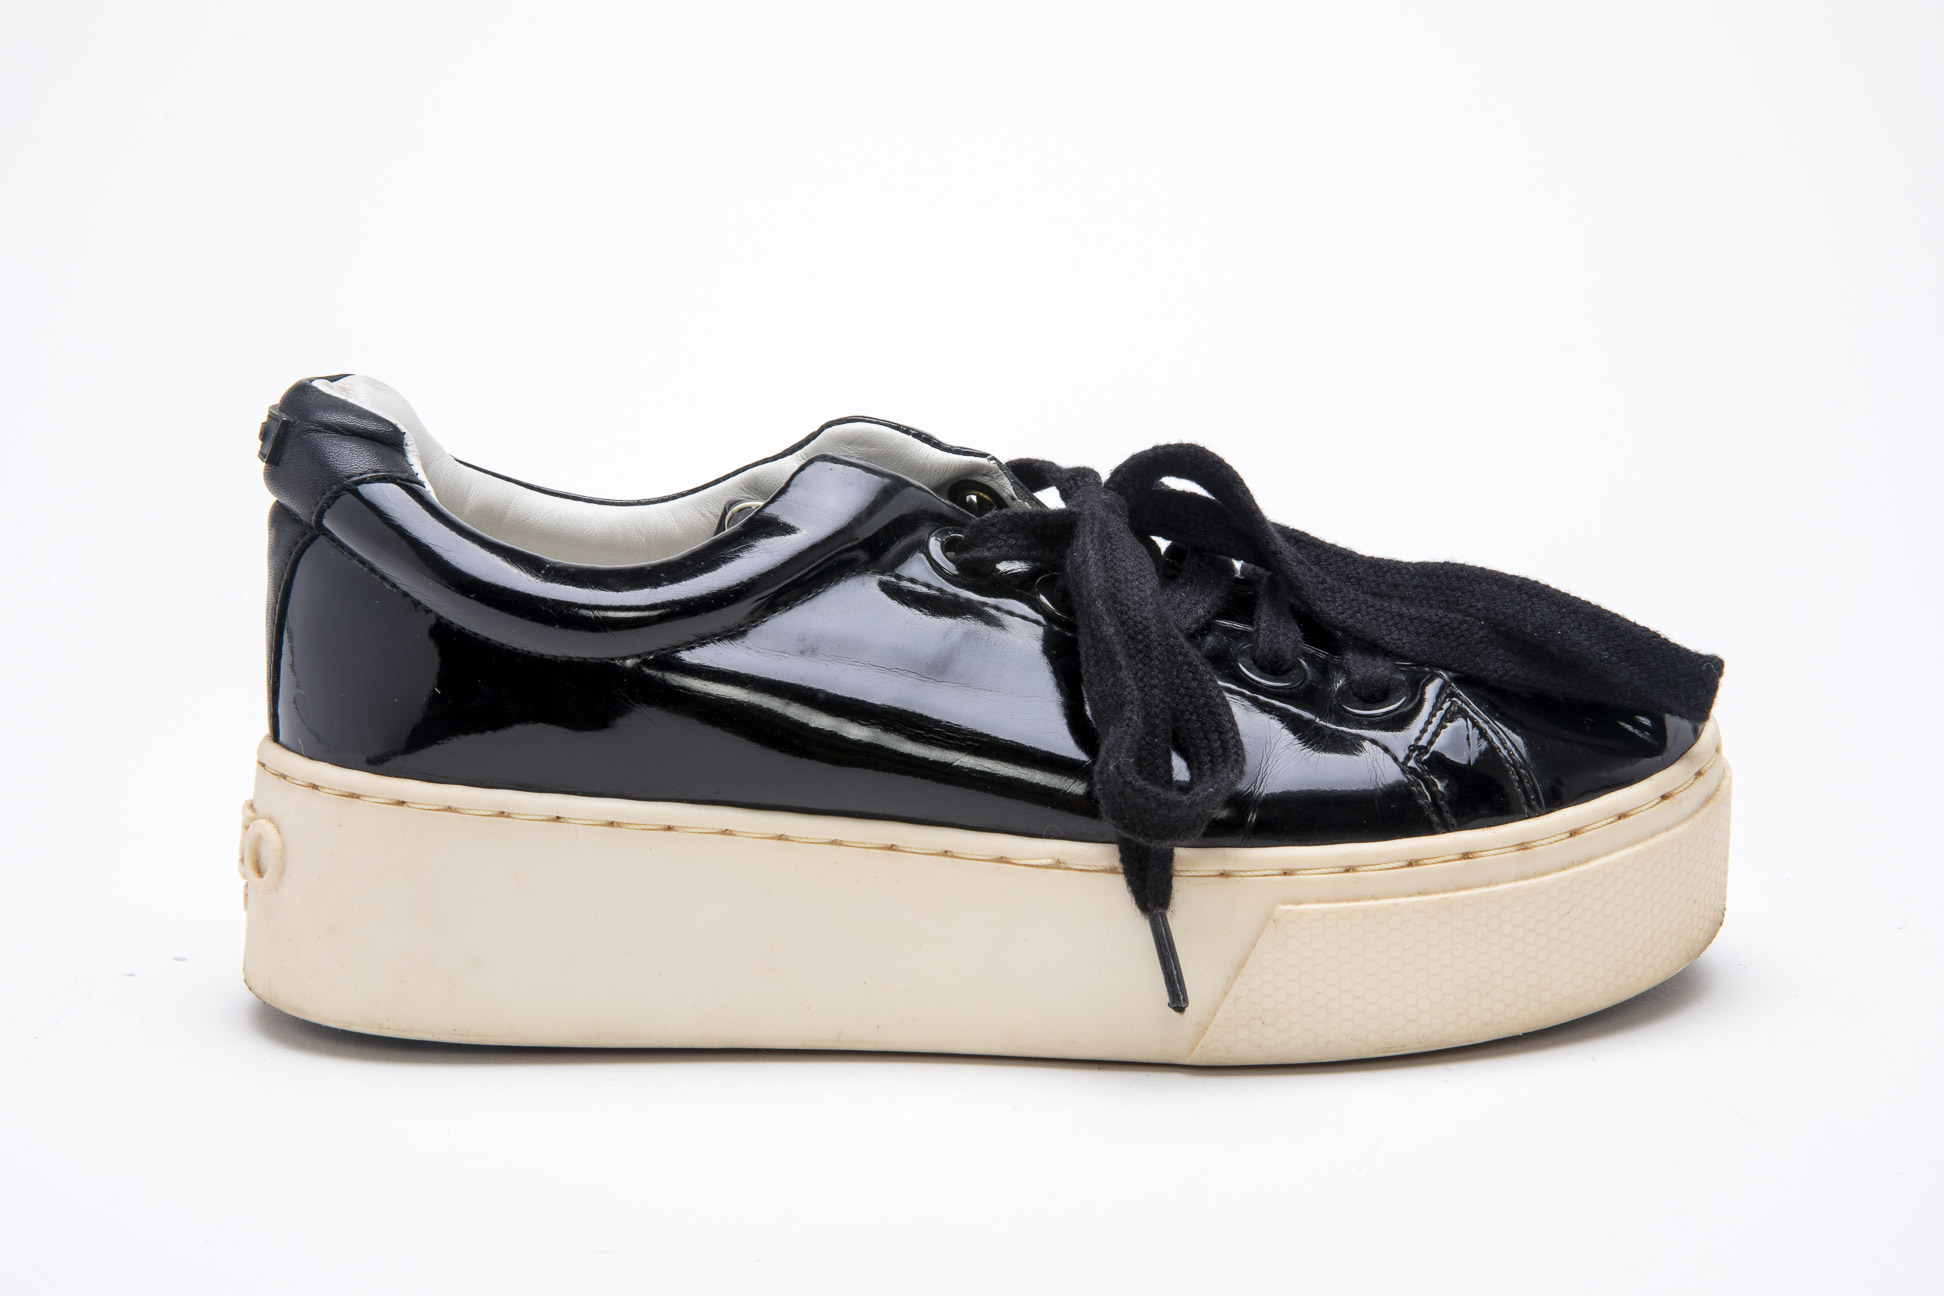 A PAIR OF KENZO BLACK PATENT LEATHER PLATFORM SNEAKERS EU 36 - Image 2 of 6